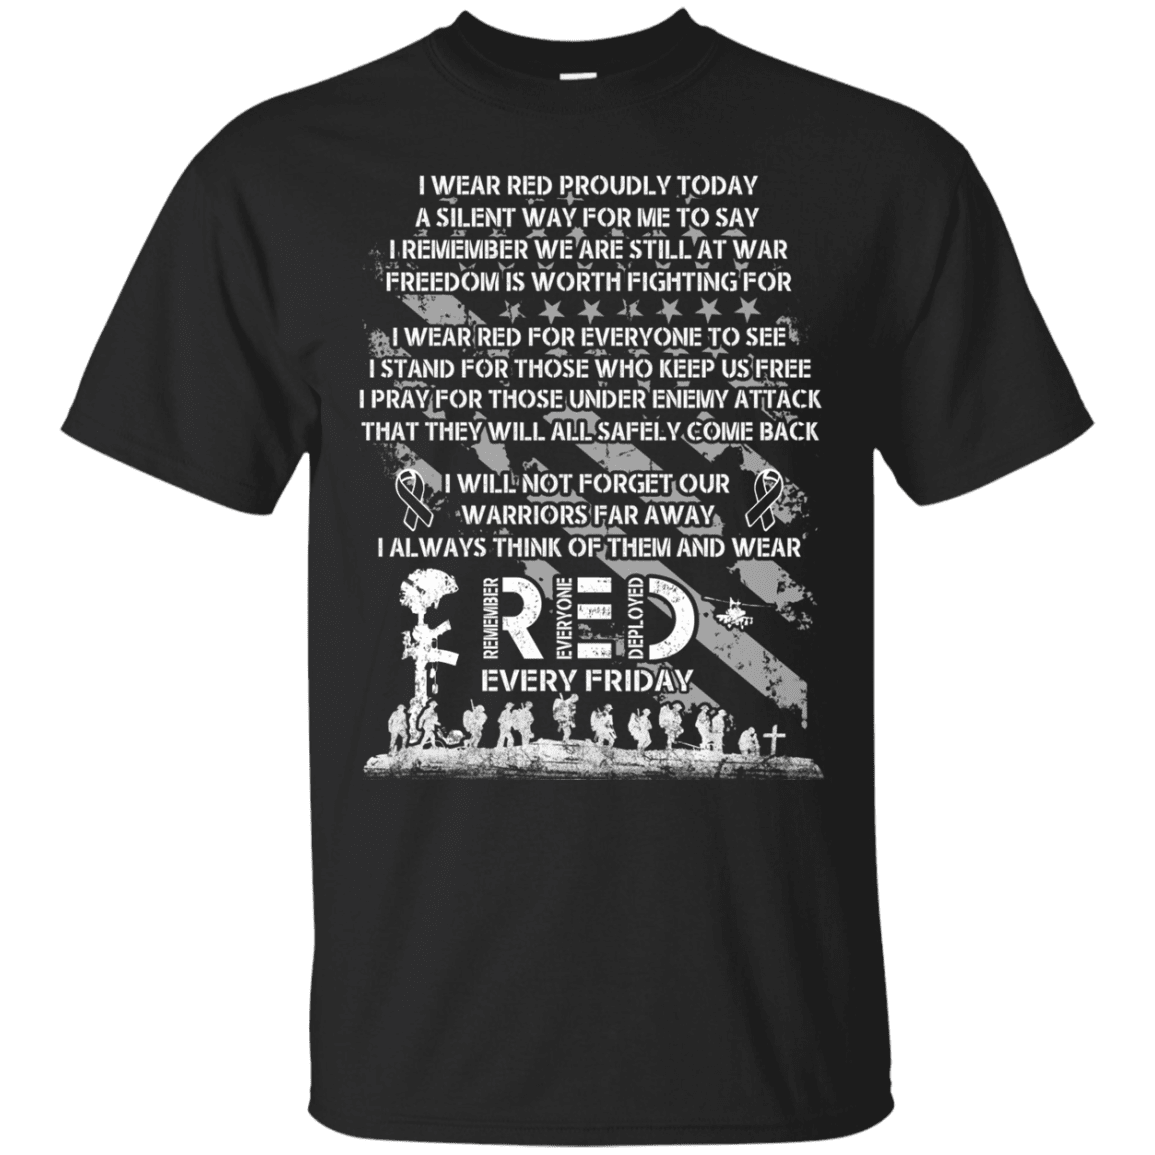 Military T-Shirt "WEAR RED EVERY DAY VETERAN REMEMBER MEMORY DAY"-TShirt-General-Veterans Nation